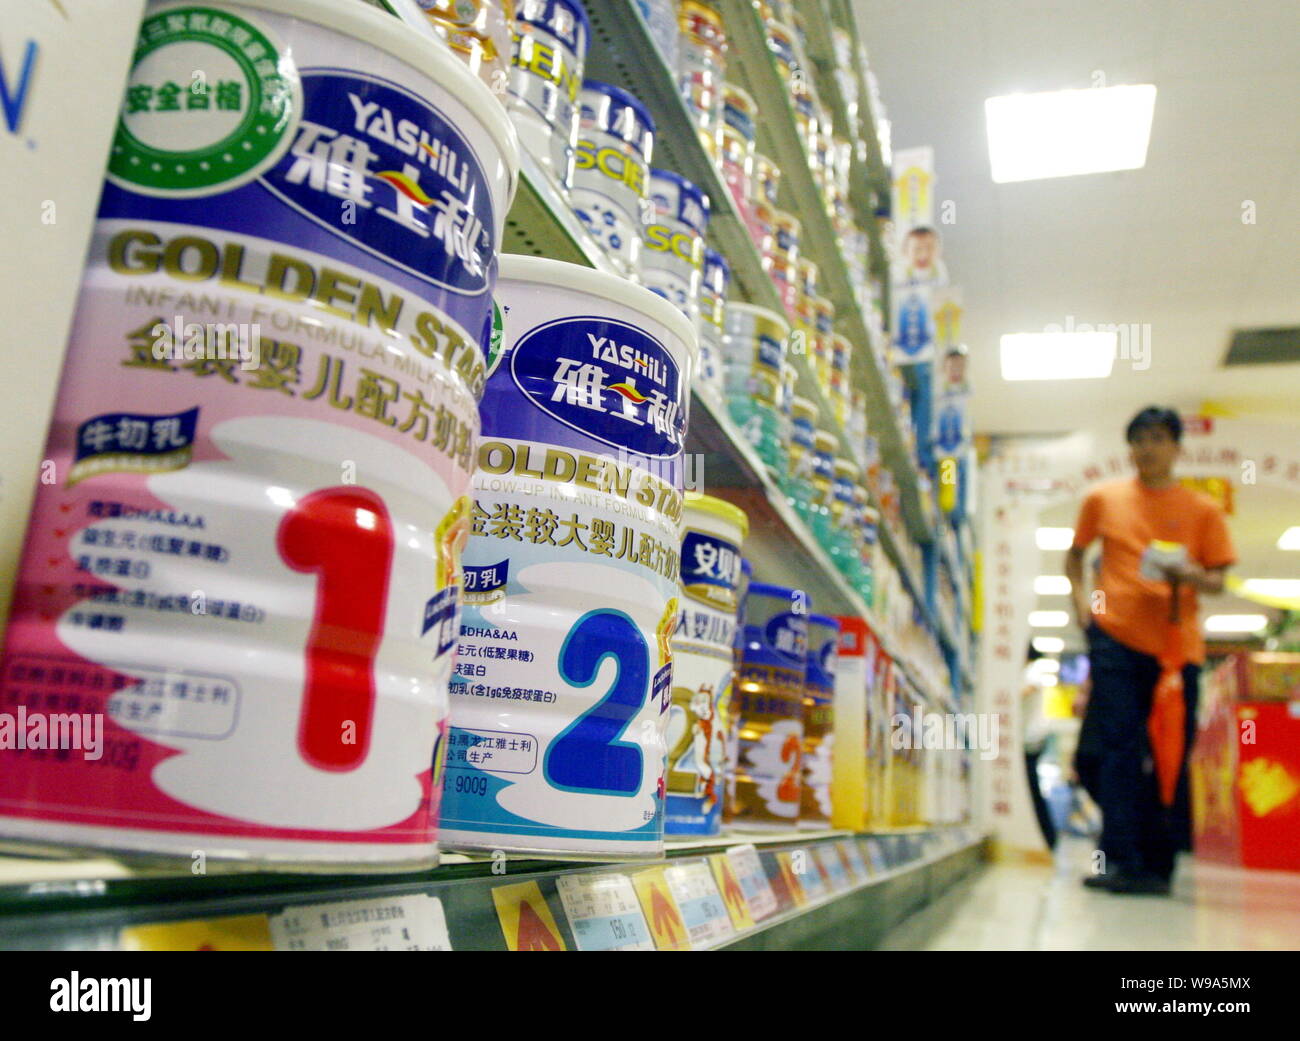 --FILE--Tins of Yashili baby milk powder are seen for sale at a supermarket in Shanghai, China, 21 September 2009.   Chinese Mainland dairy producers Stock Photo